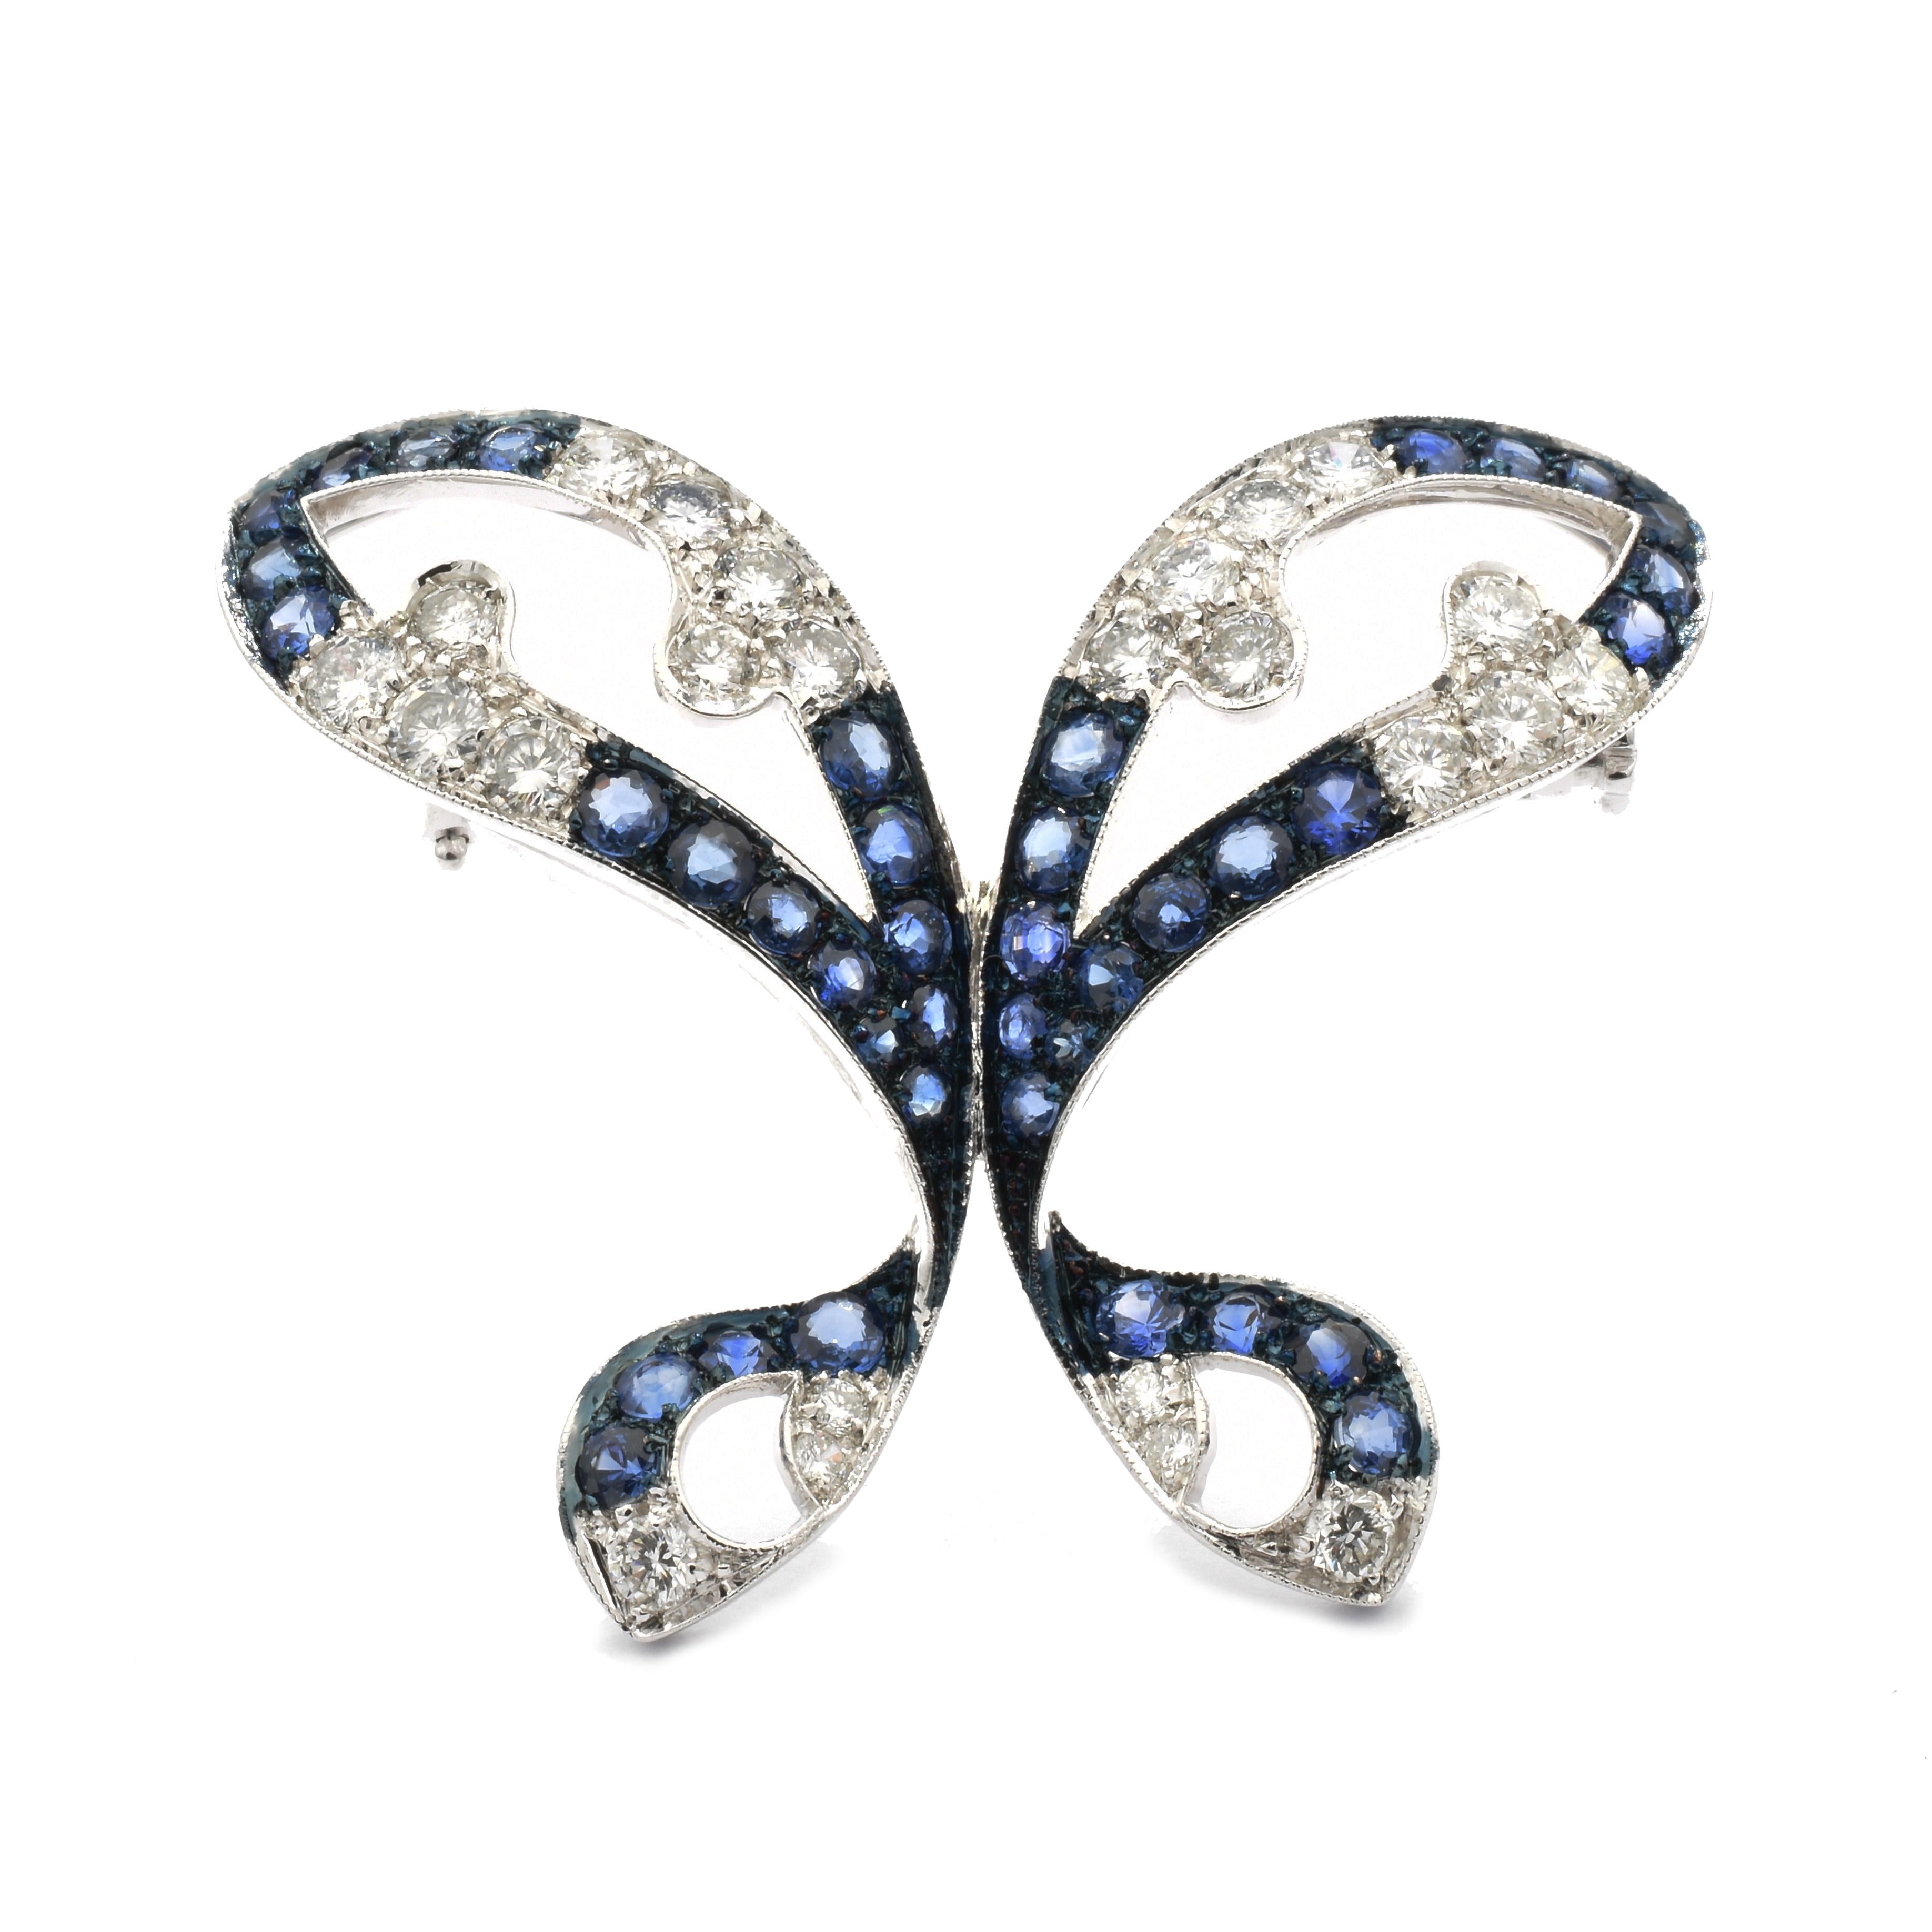 Gilberto Cassola 18 Kt White Gold Butterfly Brooch with White Diamonds and Blue Natural Sapphires
A very Unique Butterfly that can be worn on a dress, on a jacket or on a scarf too. 
Hanmade Millgrain setting.
One of a Kind Piece, Handmade in our